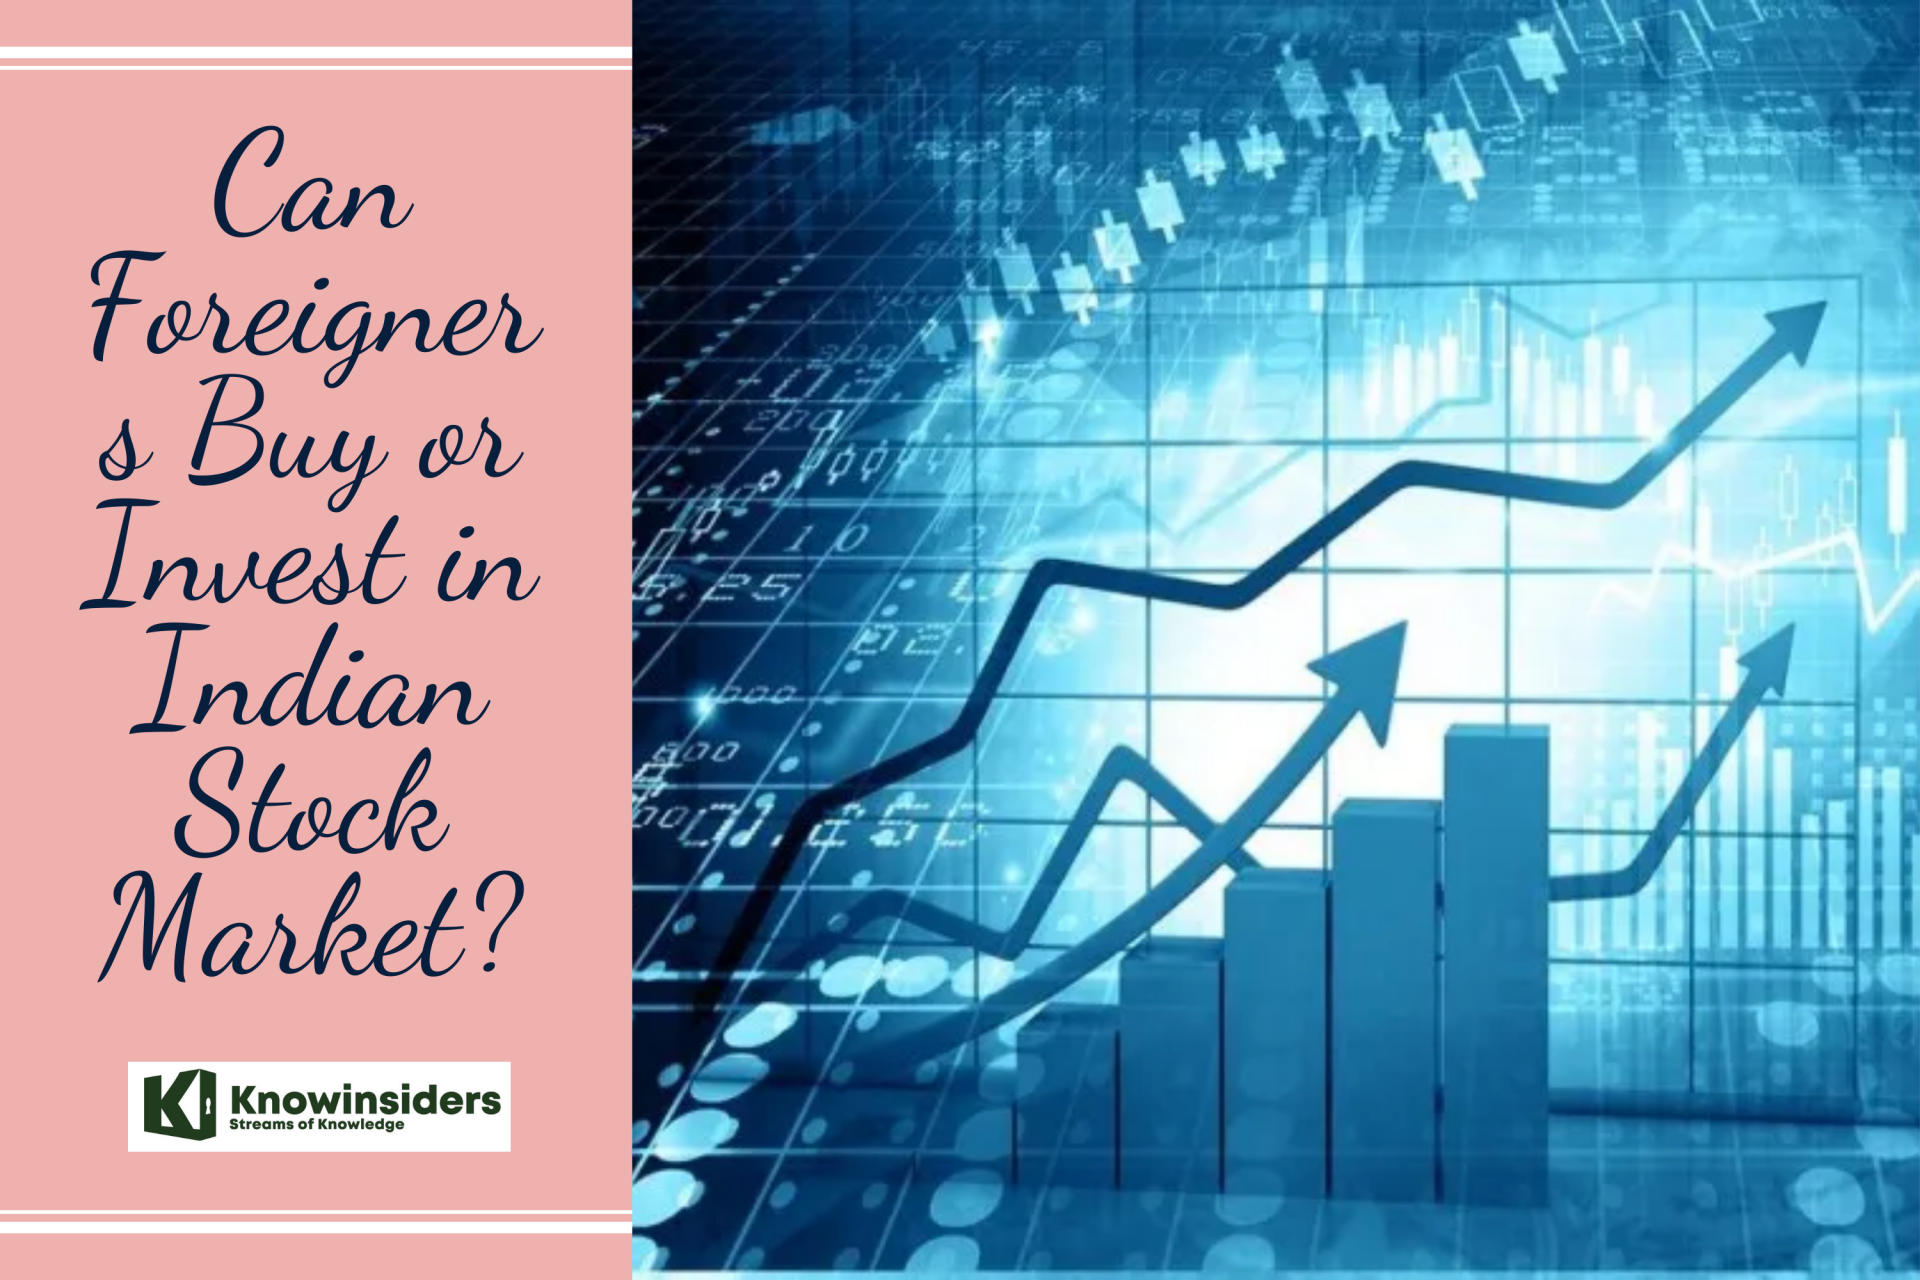 Can Foreigners Buy or Invest in the Indian Stock Market?